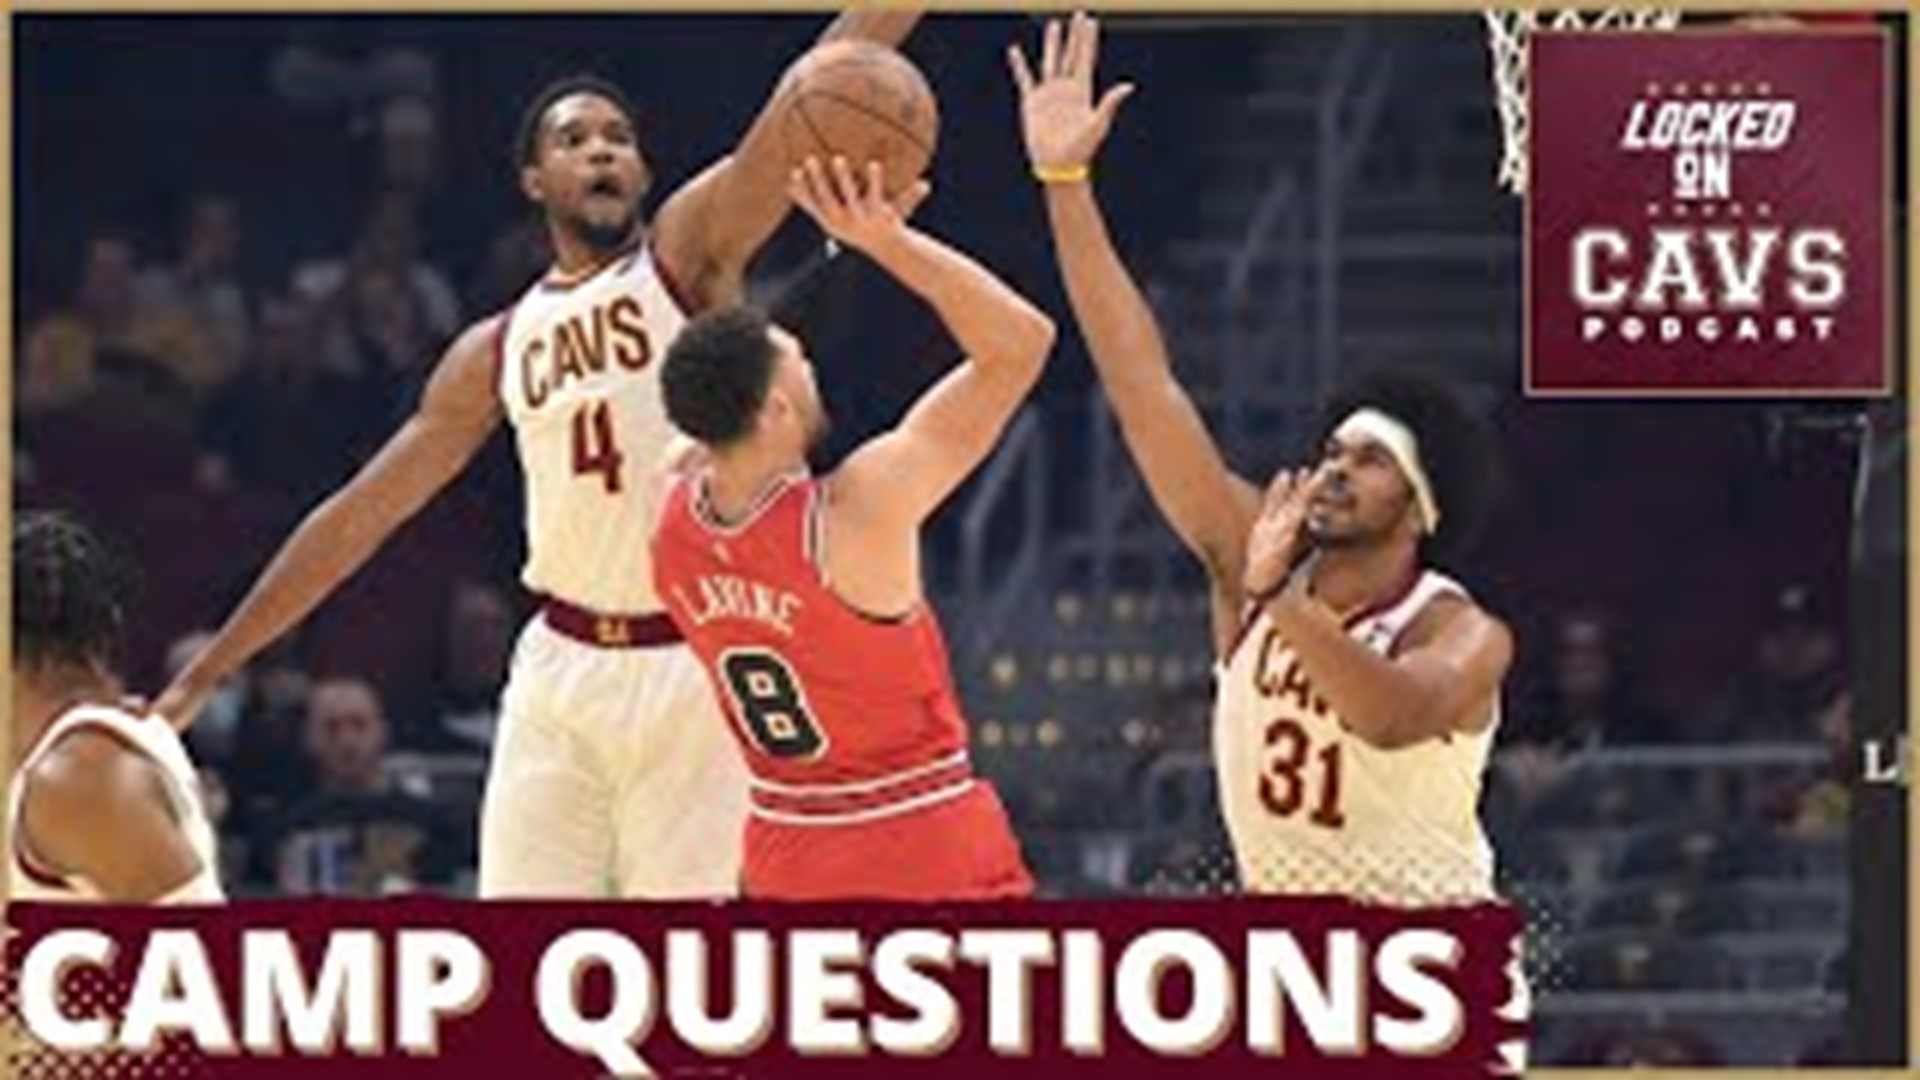 On today's episode of Locked On Cavs, we talk about who starts at the small forward position and who gets minutes outside of mainstay rotation pieces.